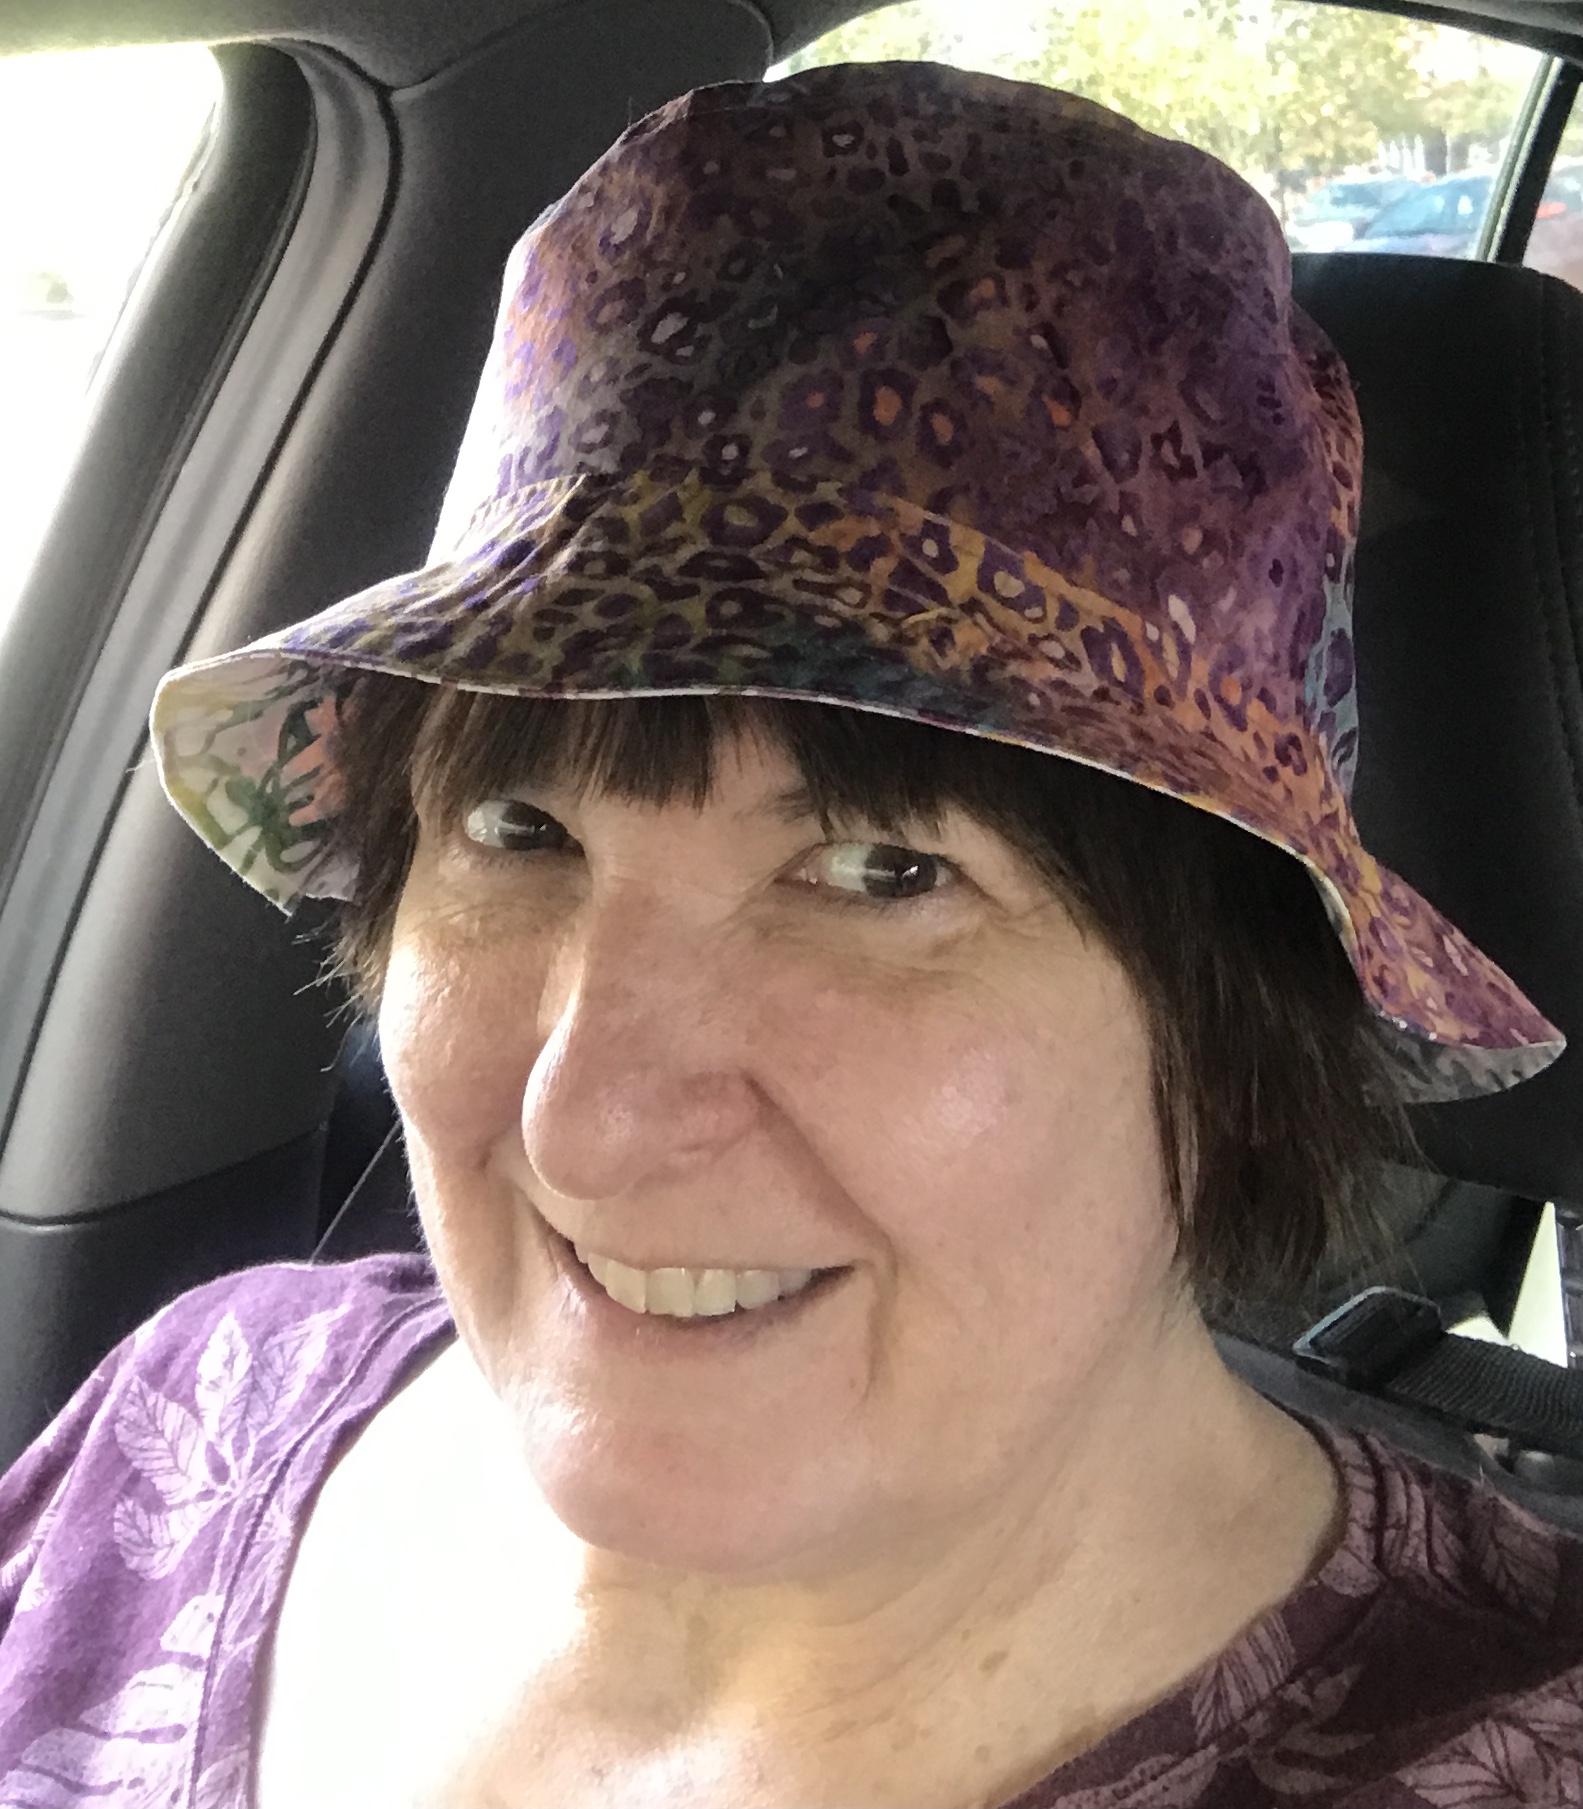 Example of woman wearing same hat in different fabric